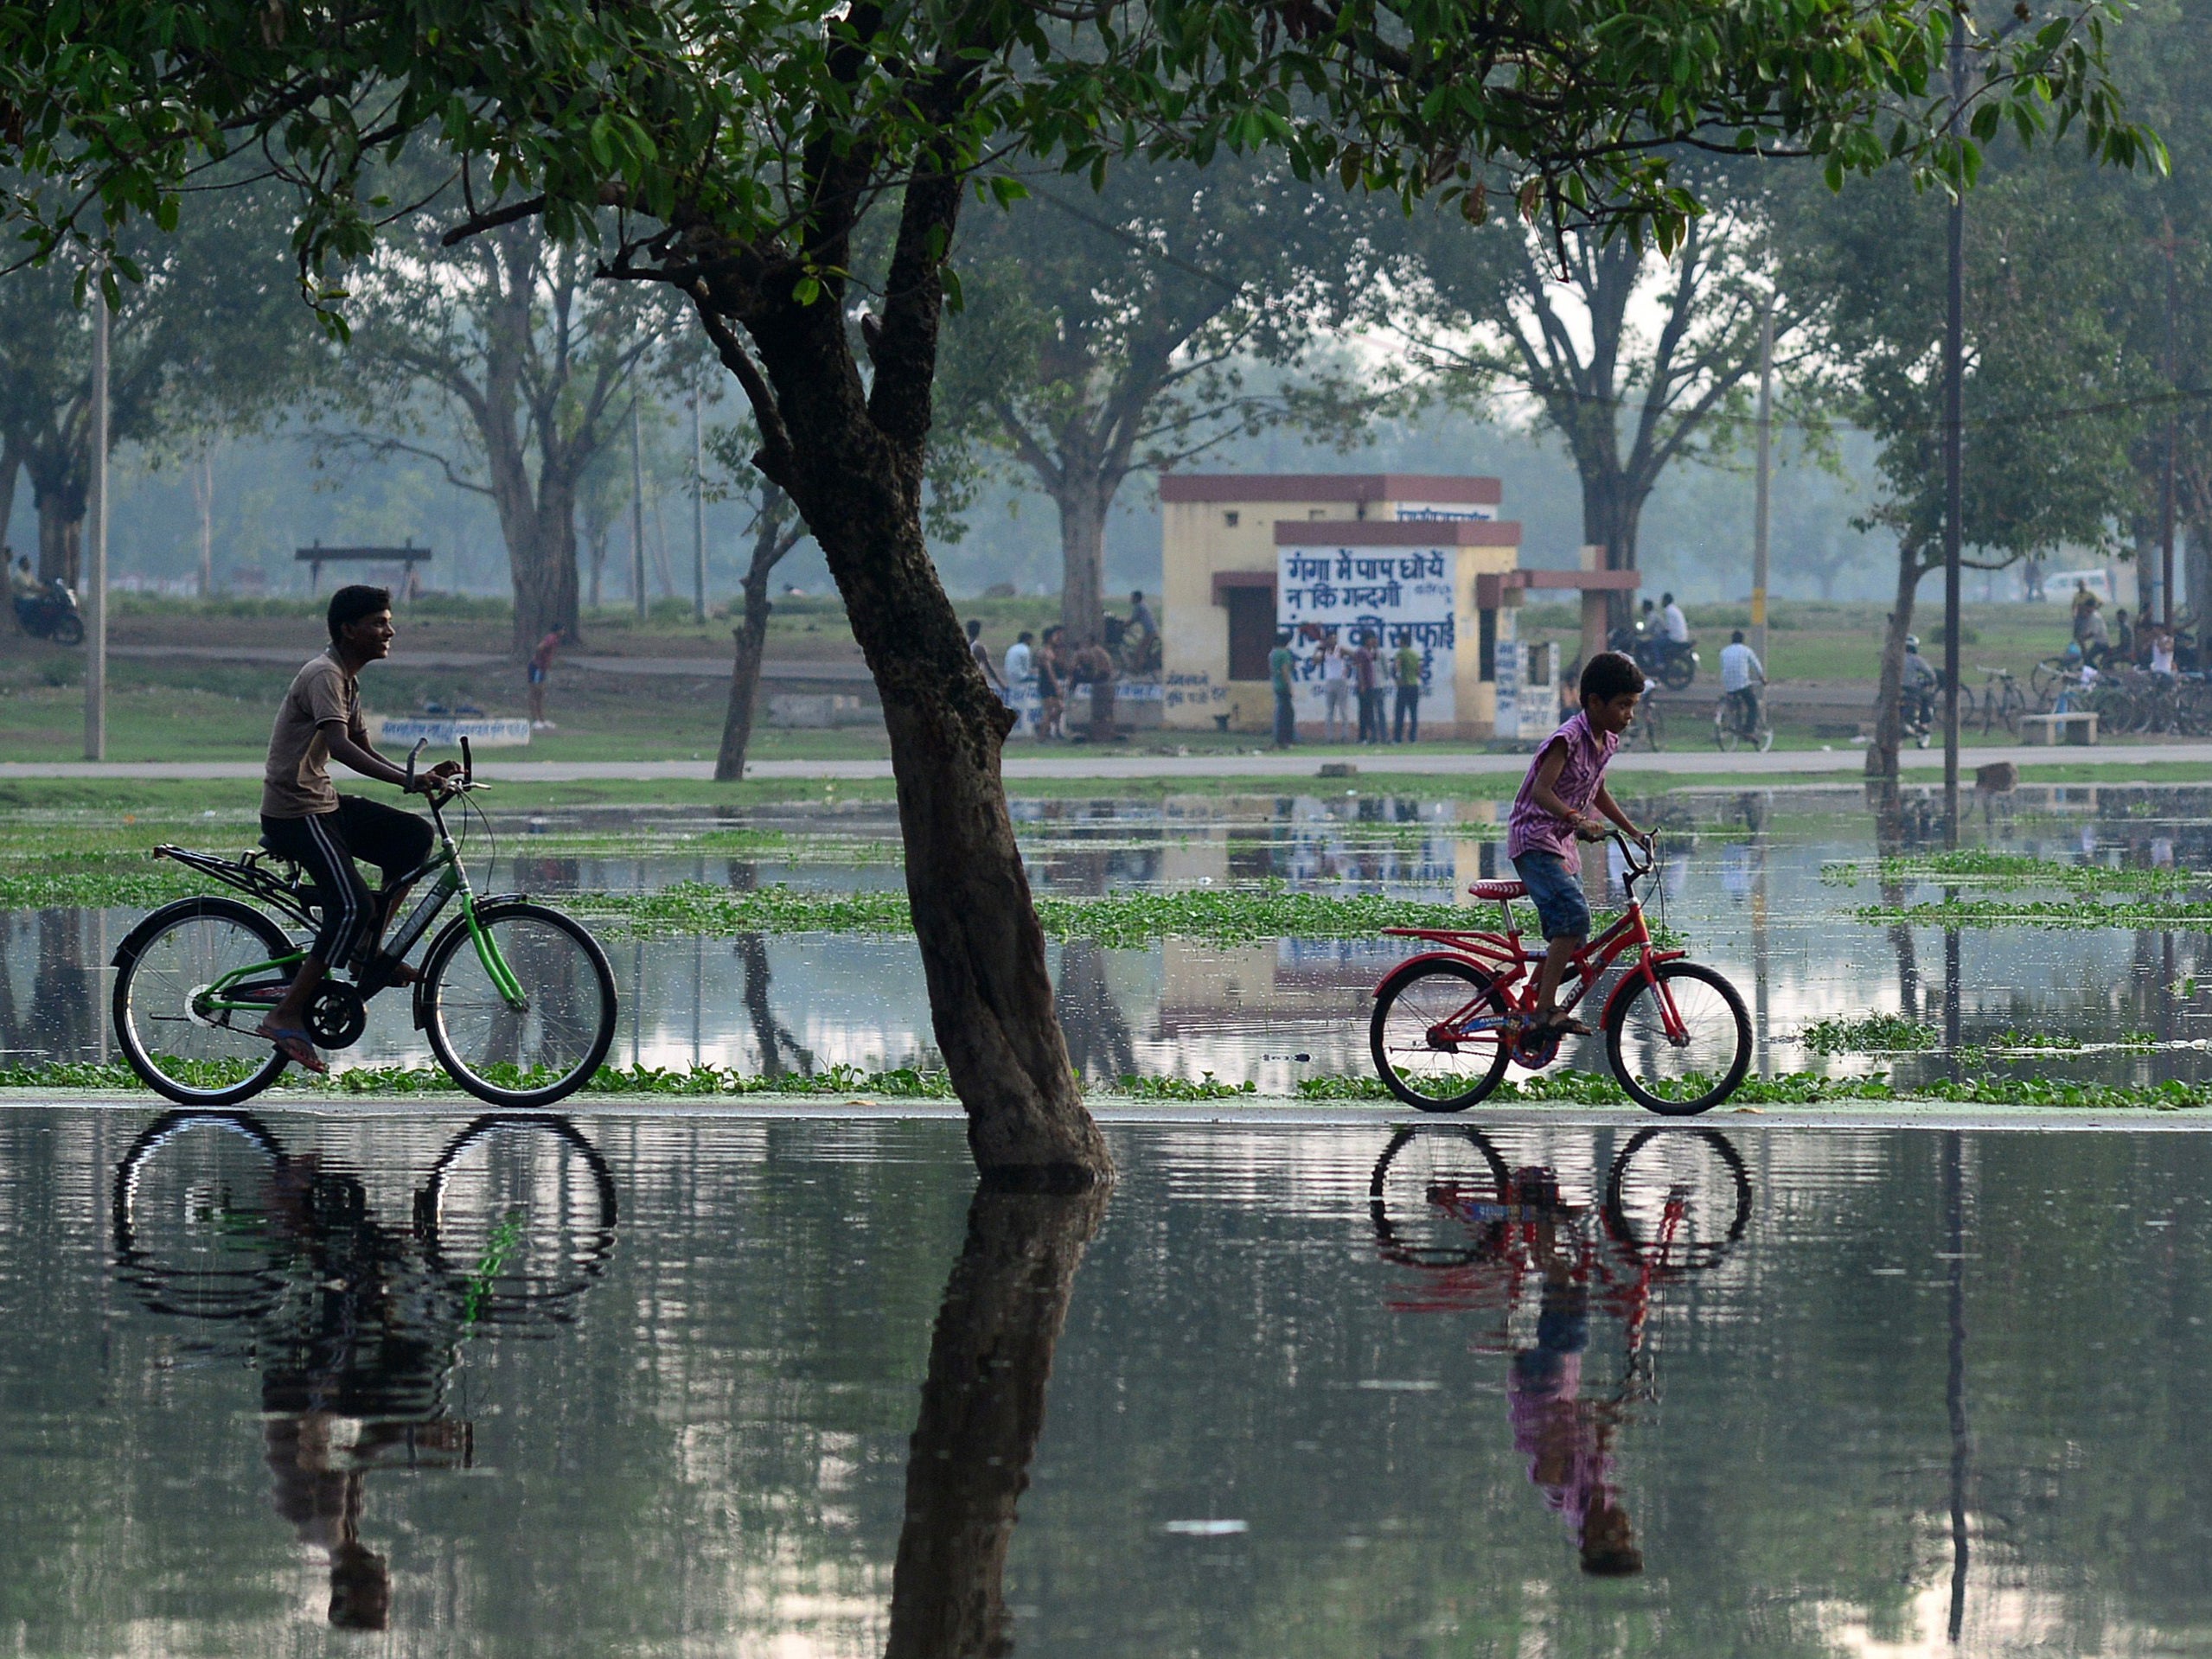 24 hours of rain causes heavy flooding in Northern India